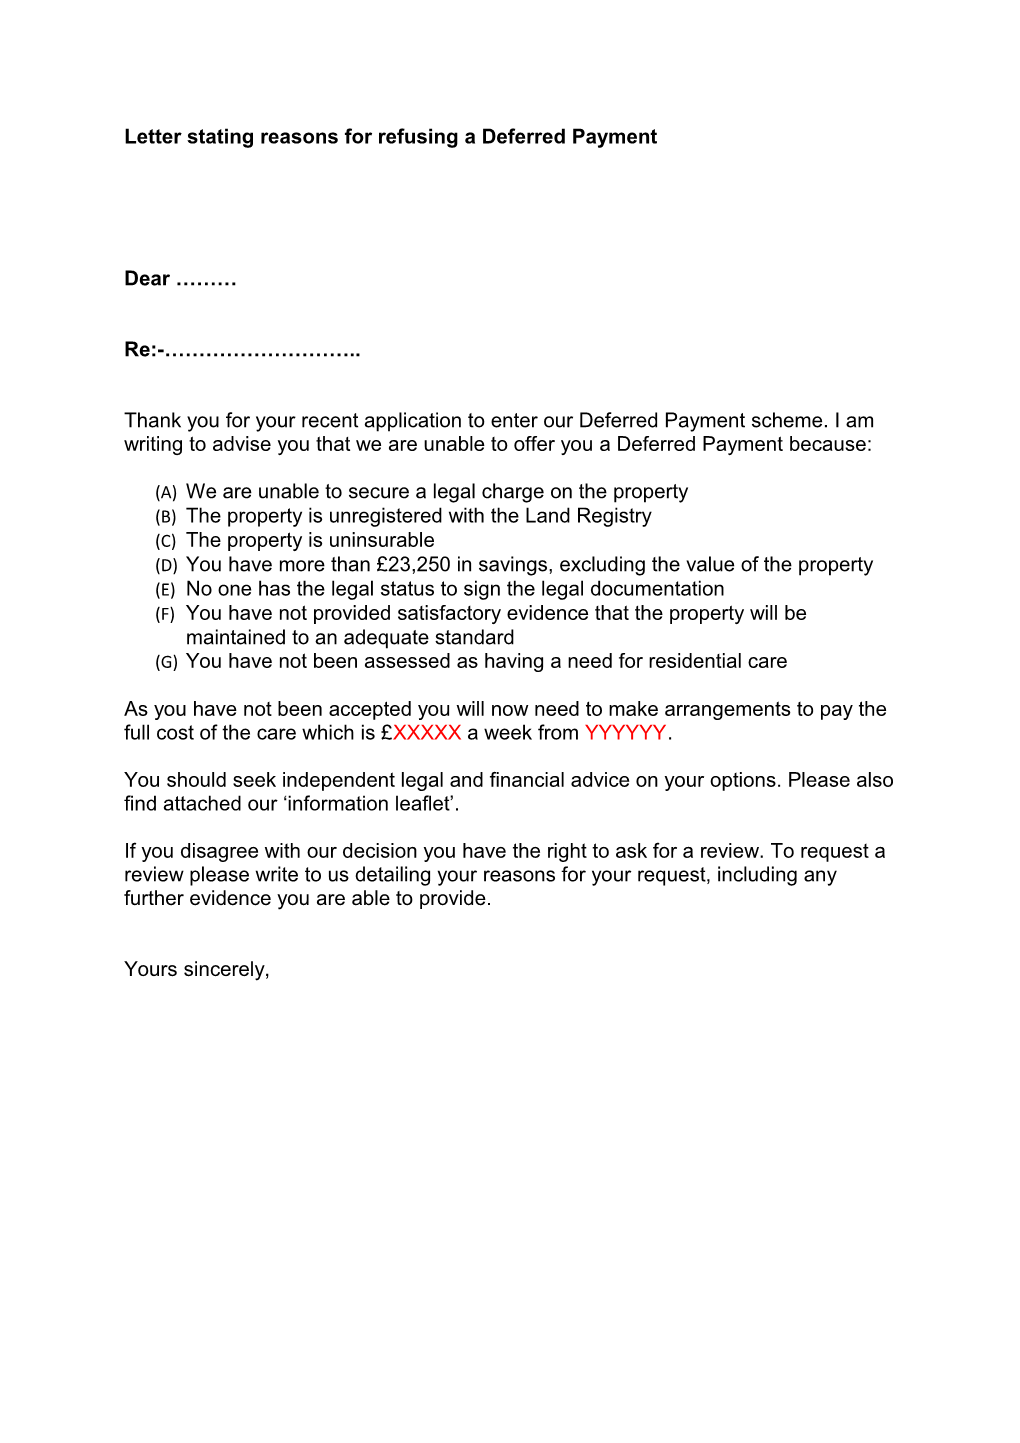 Letter Stating Reasons for Refusing a Deferred Payment